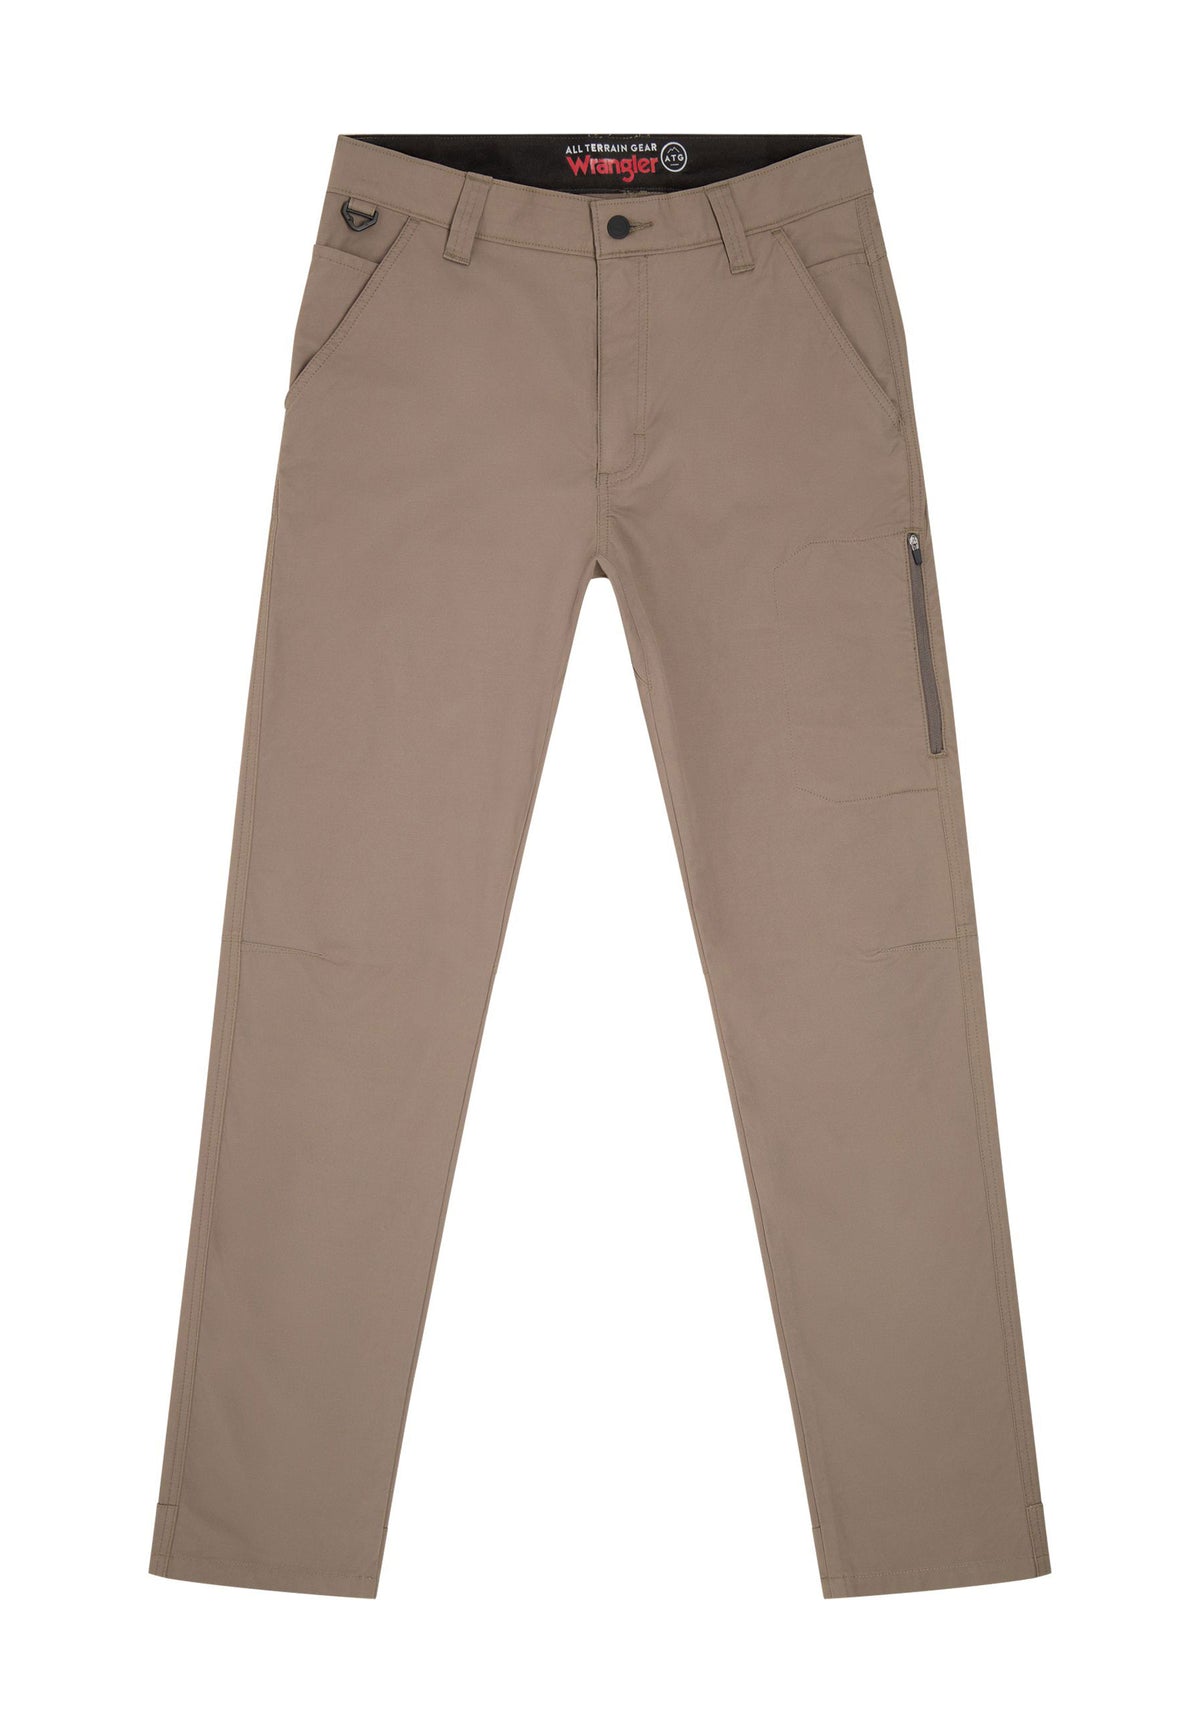 Sustainable Utility Pant in Bungee Cord